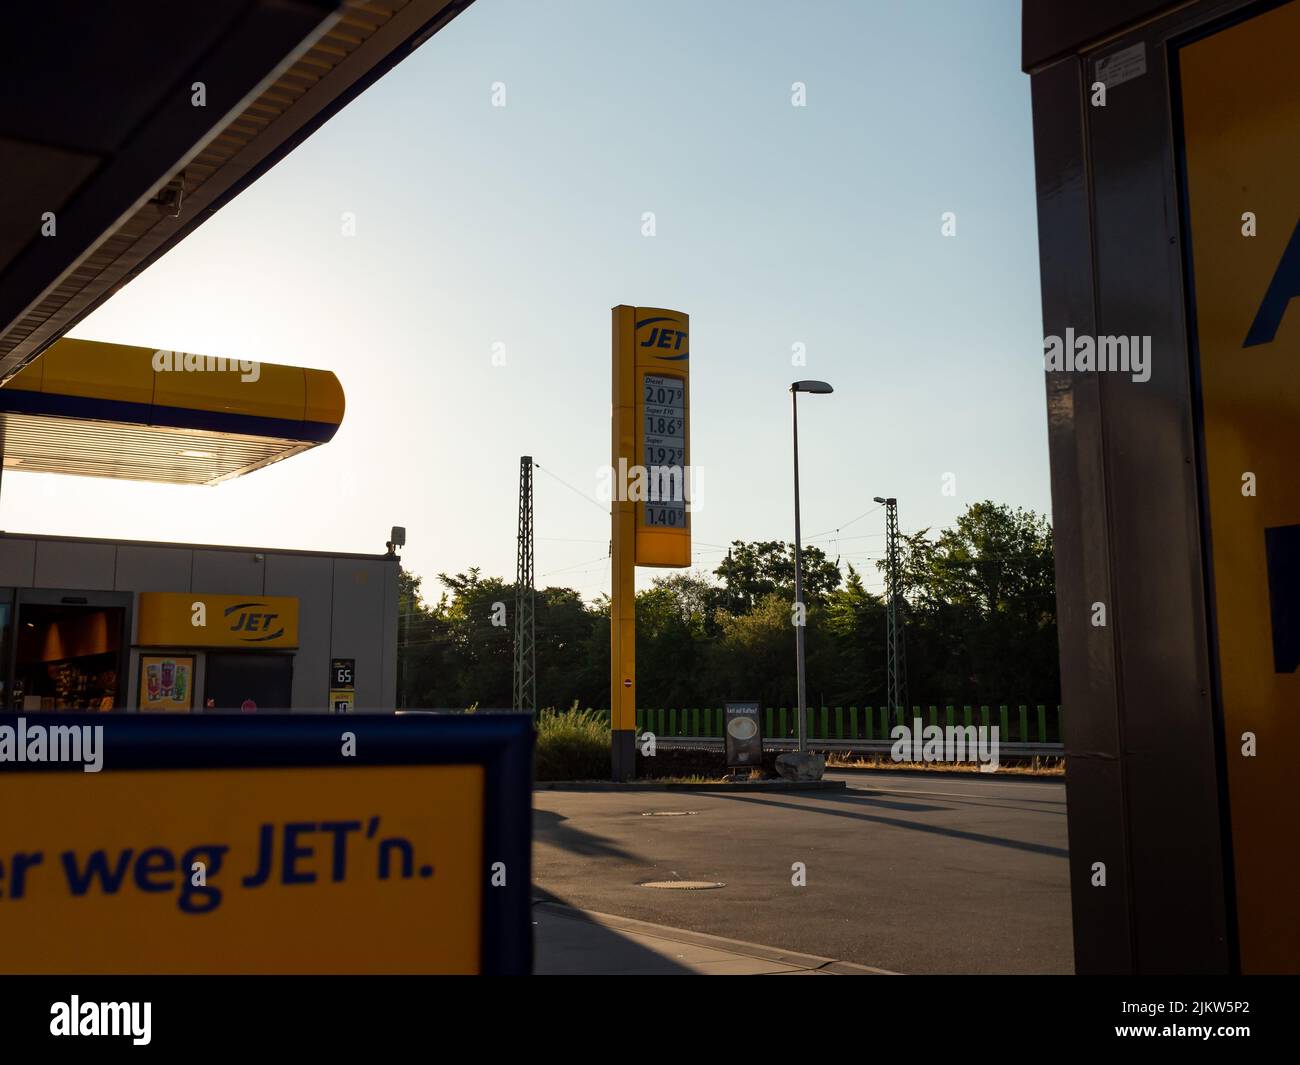 High prices for mobility at a JET gas station. Expensive gasoline and diesel. The inflation is pushing the costs for transportation to a new level. Stock Photo